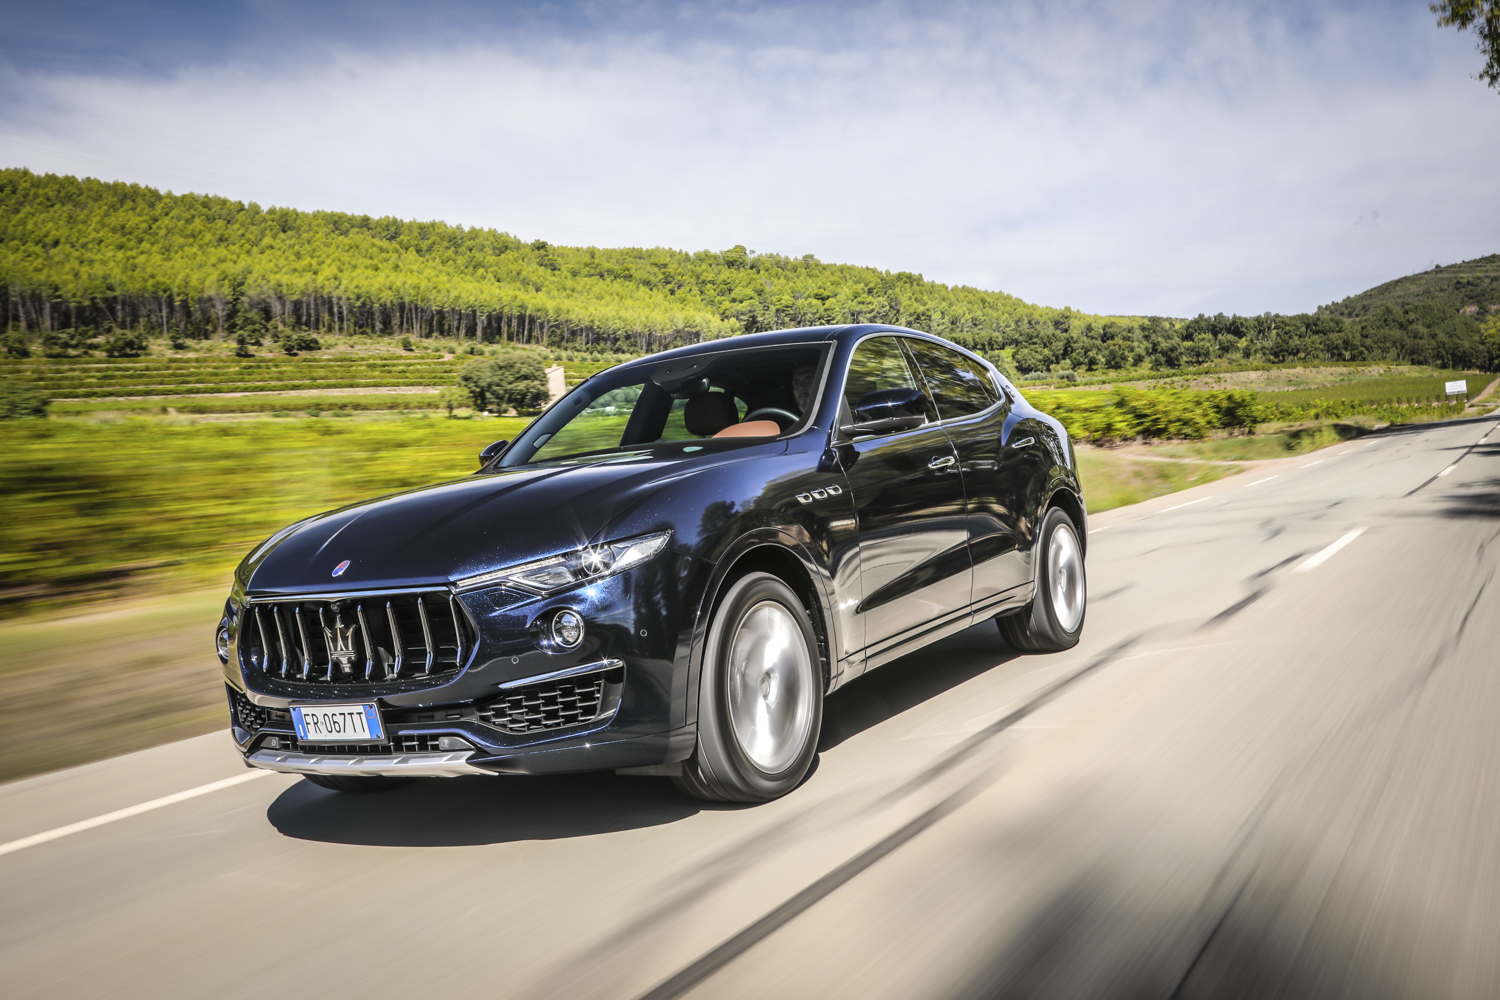 maserati levante suv family friendly review press images crop 9